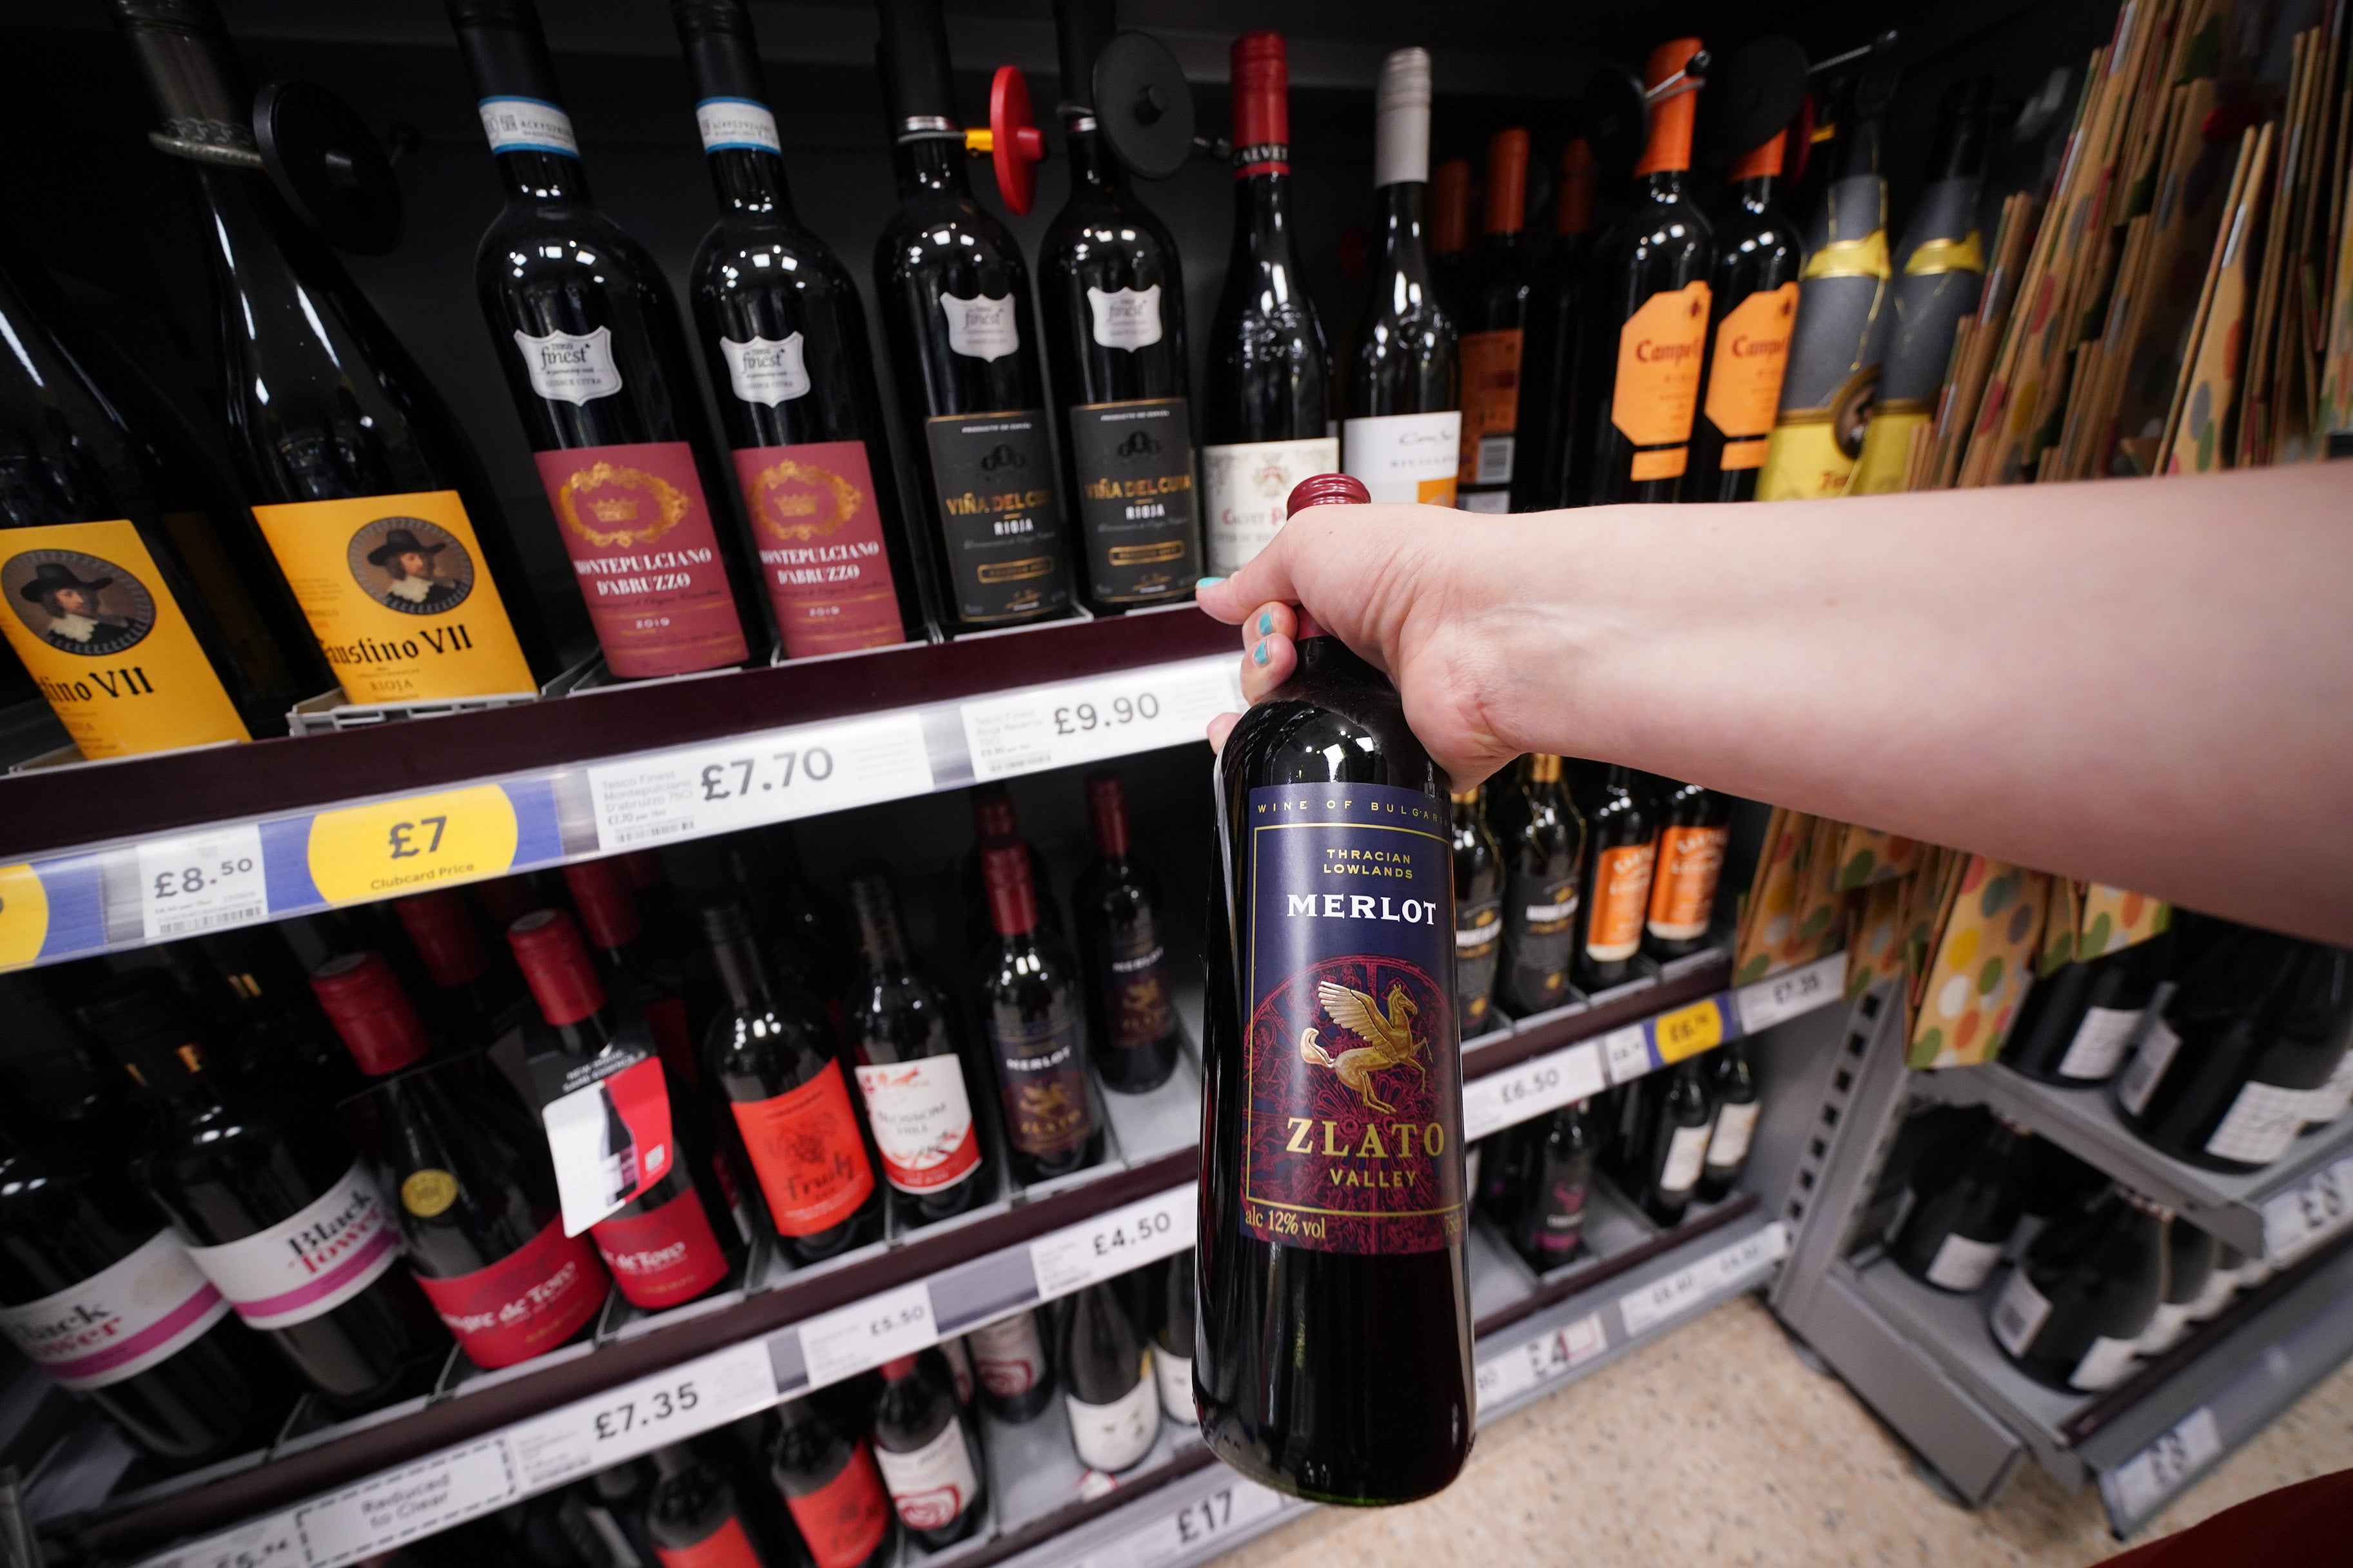 A shopper looking at wine in a Tesco supermarket in London